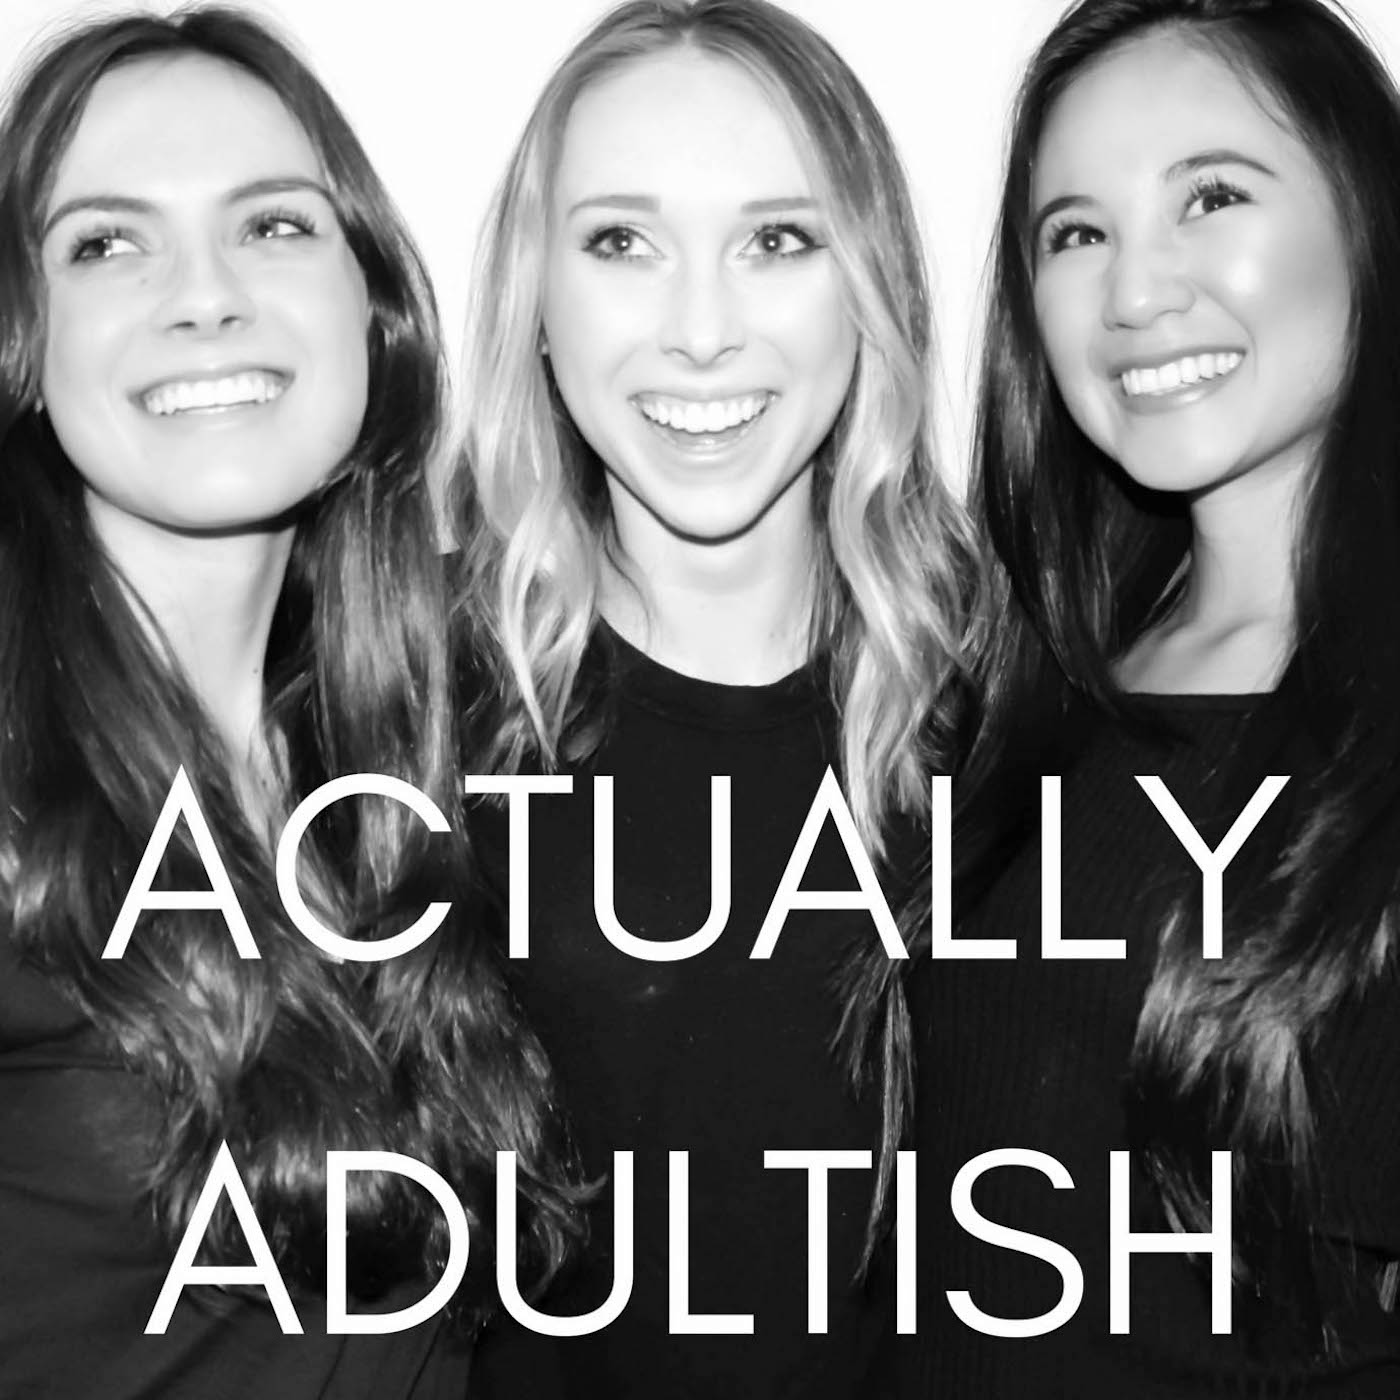 ACTUALLY ADULTISH - IT'S PODCAST TIME!